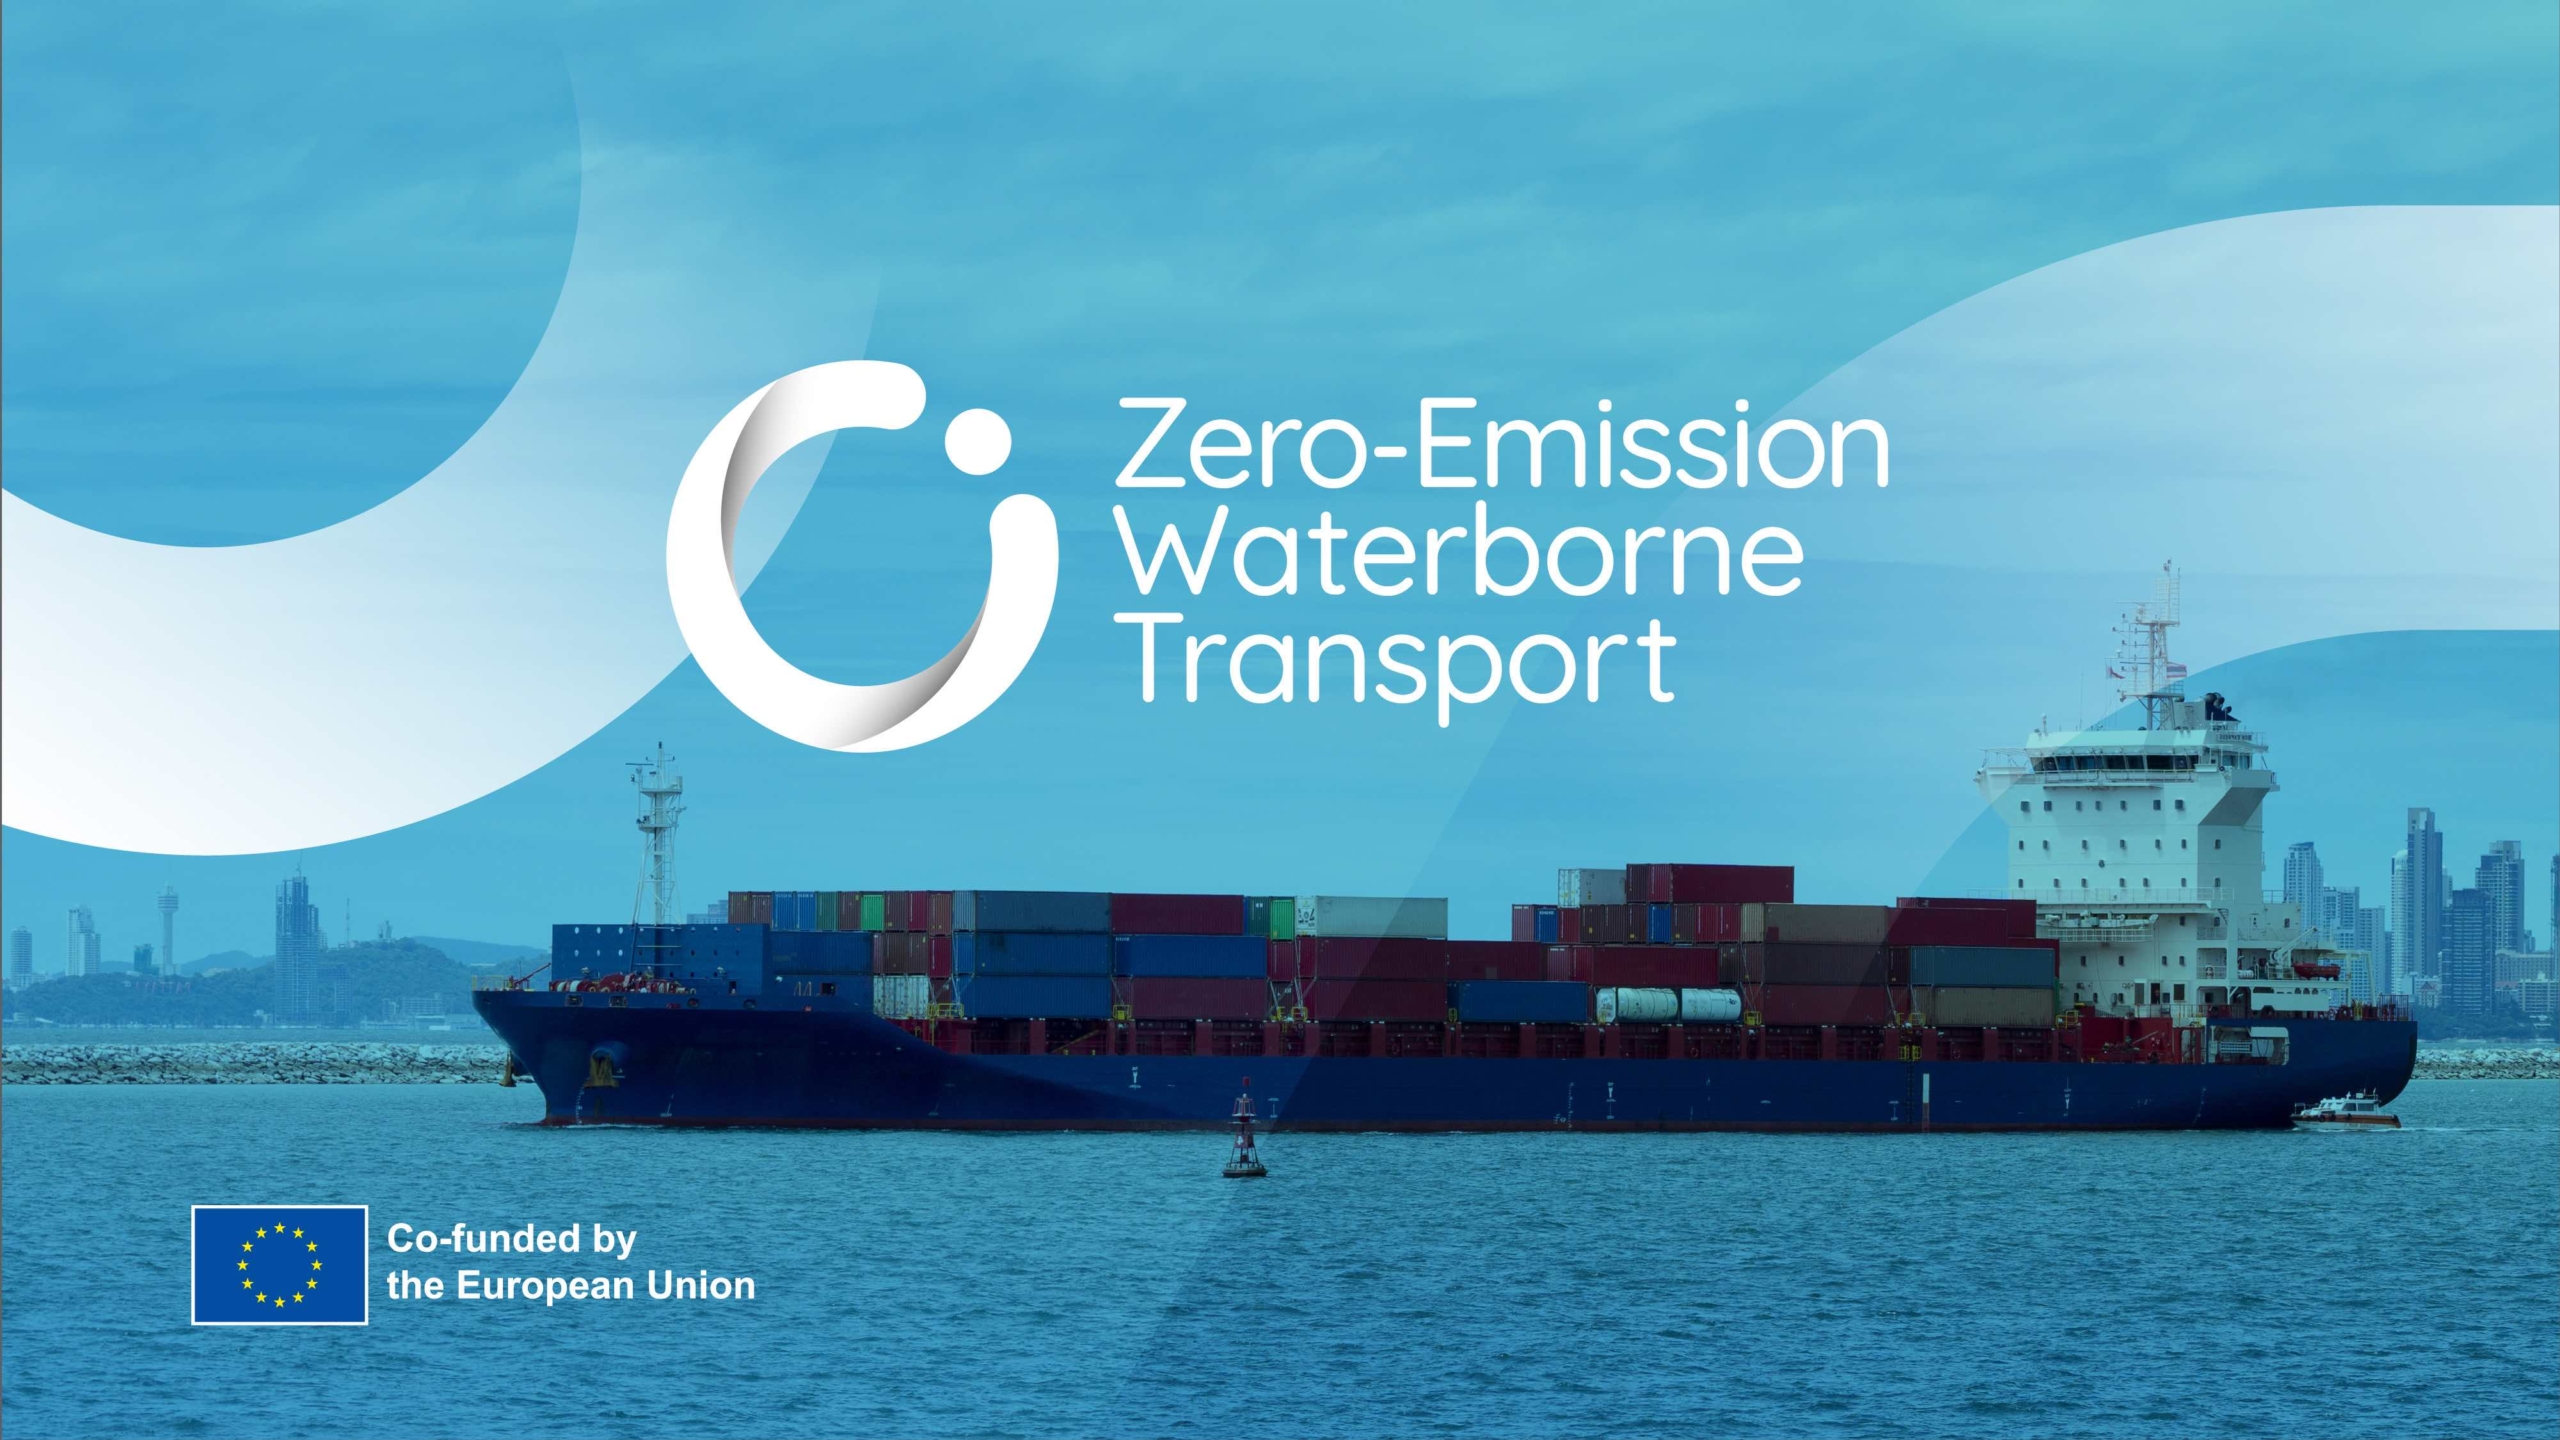 New European Partnership Commits the Waterborne Transport Sector to Zero Emissions by 2050